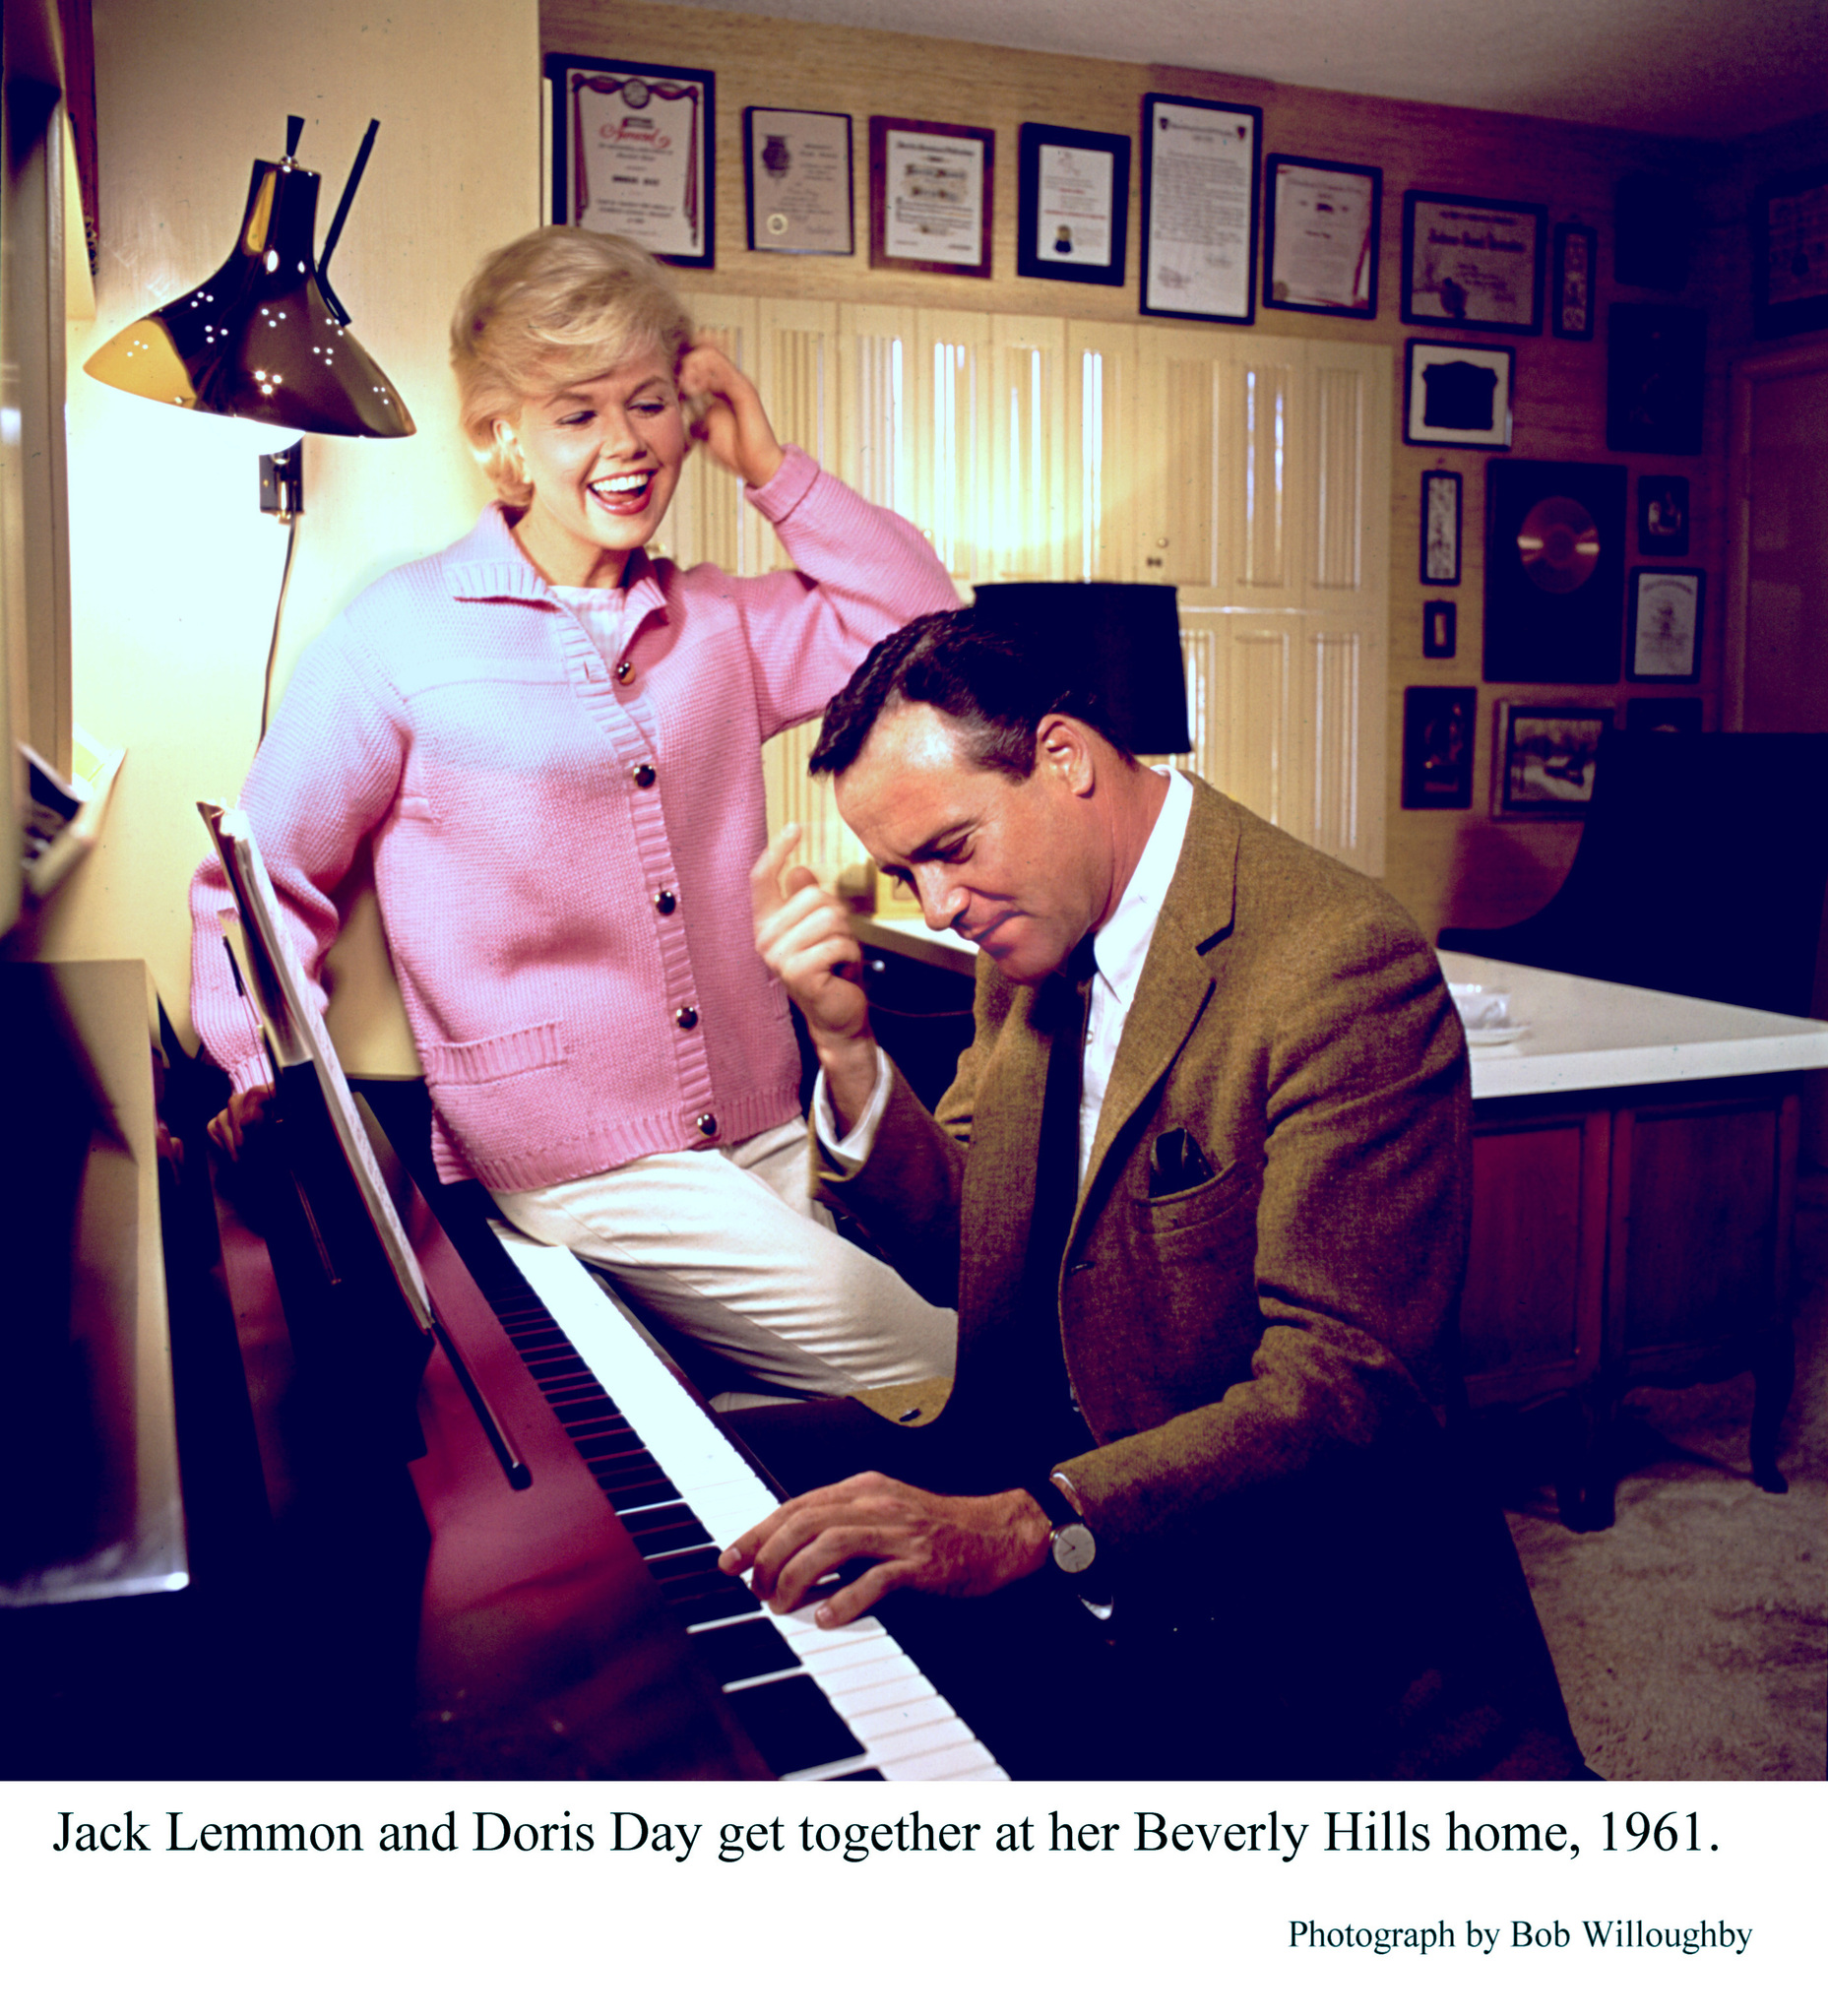 Jack Lemmon with Doris Day at her Beverly Hills home, 1961.